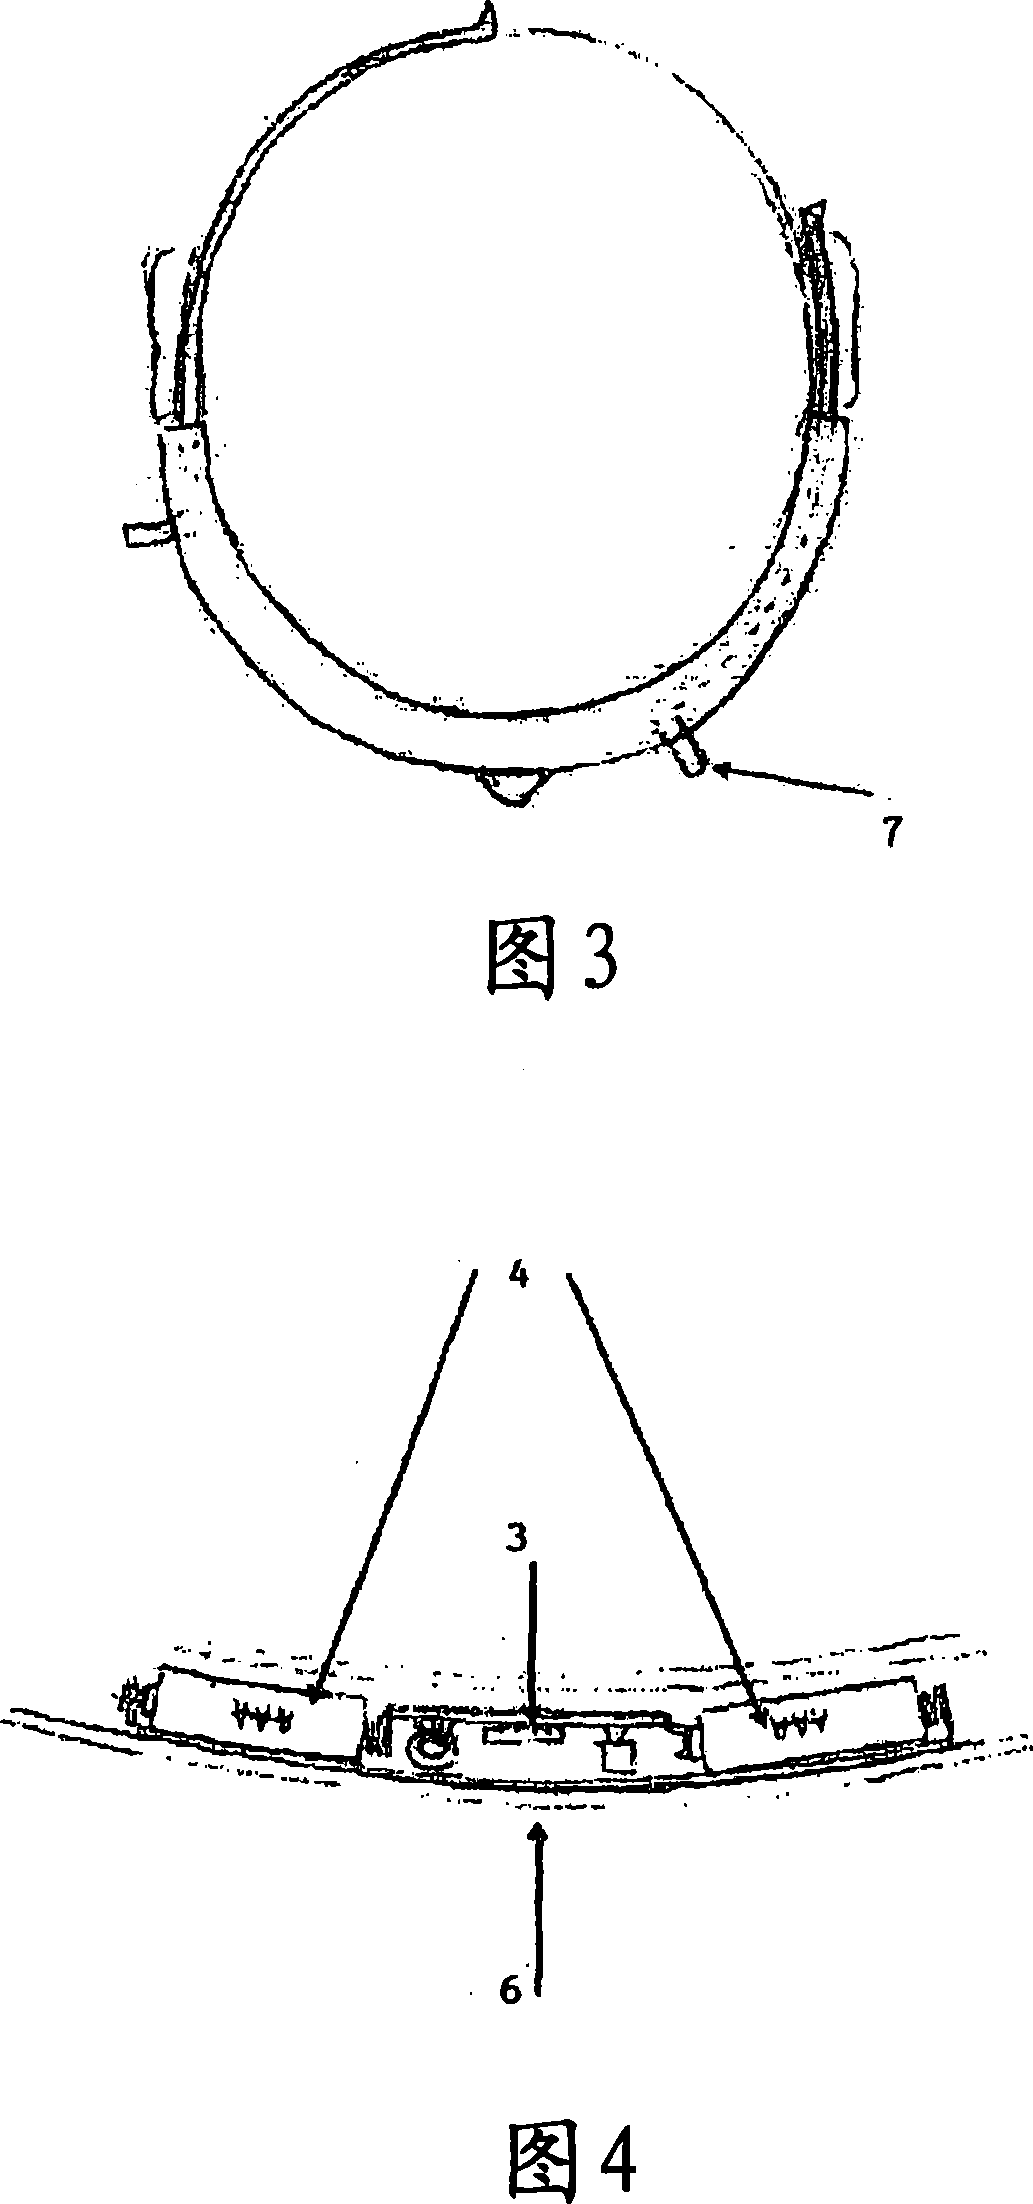 Apparatus for electrically inhibiting facial muscles